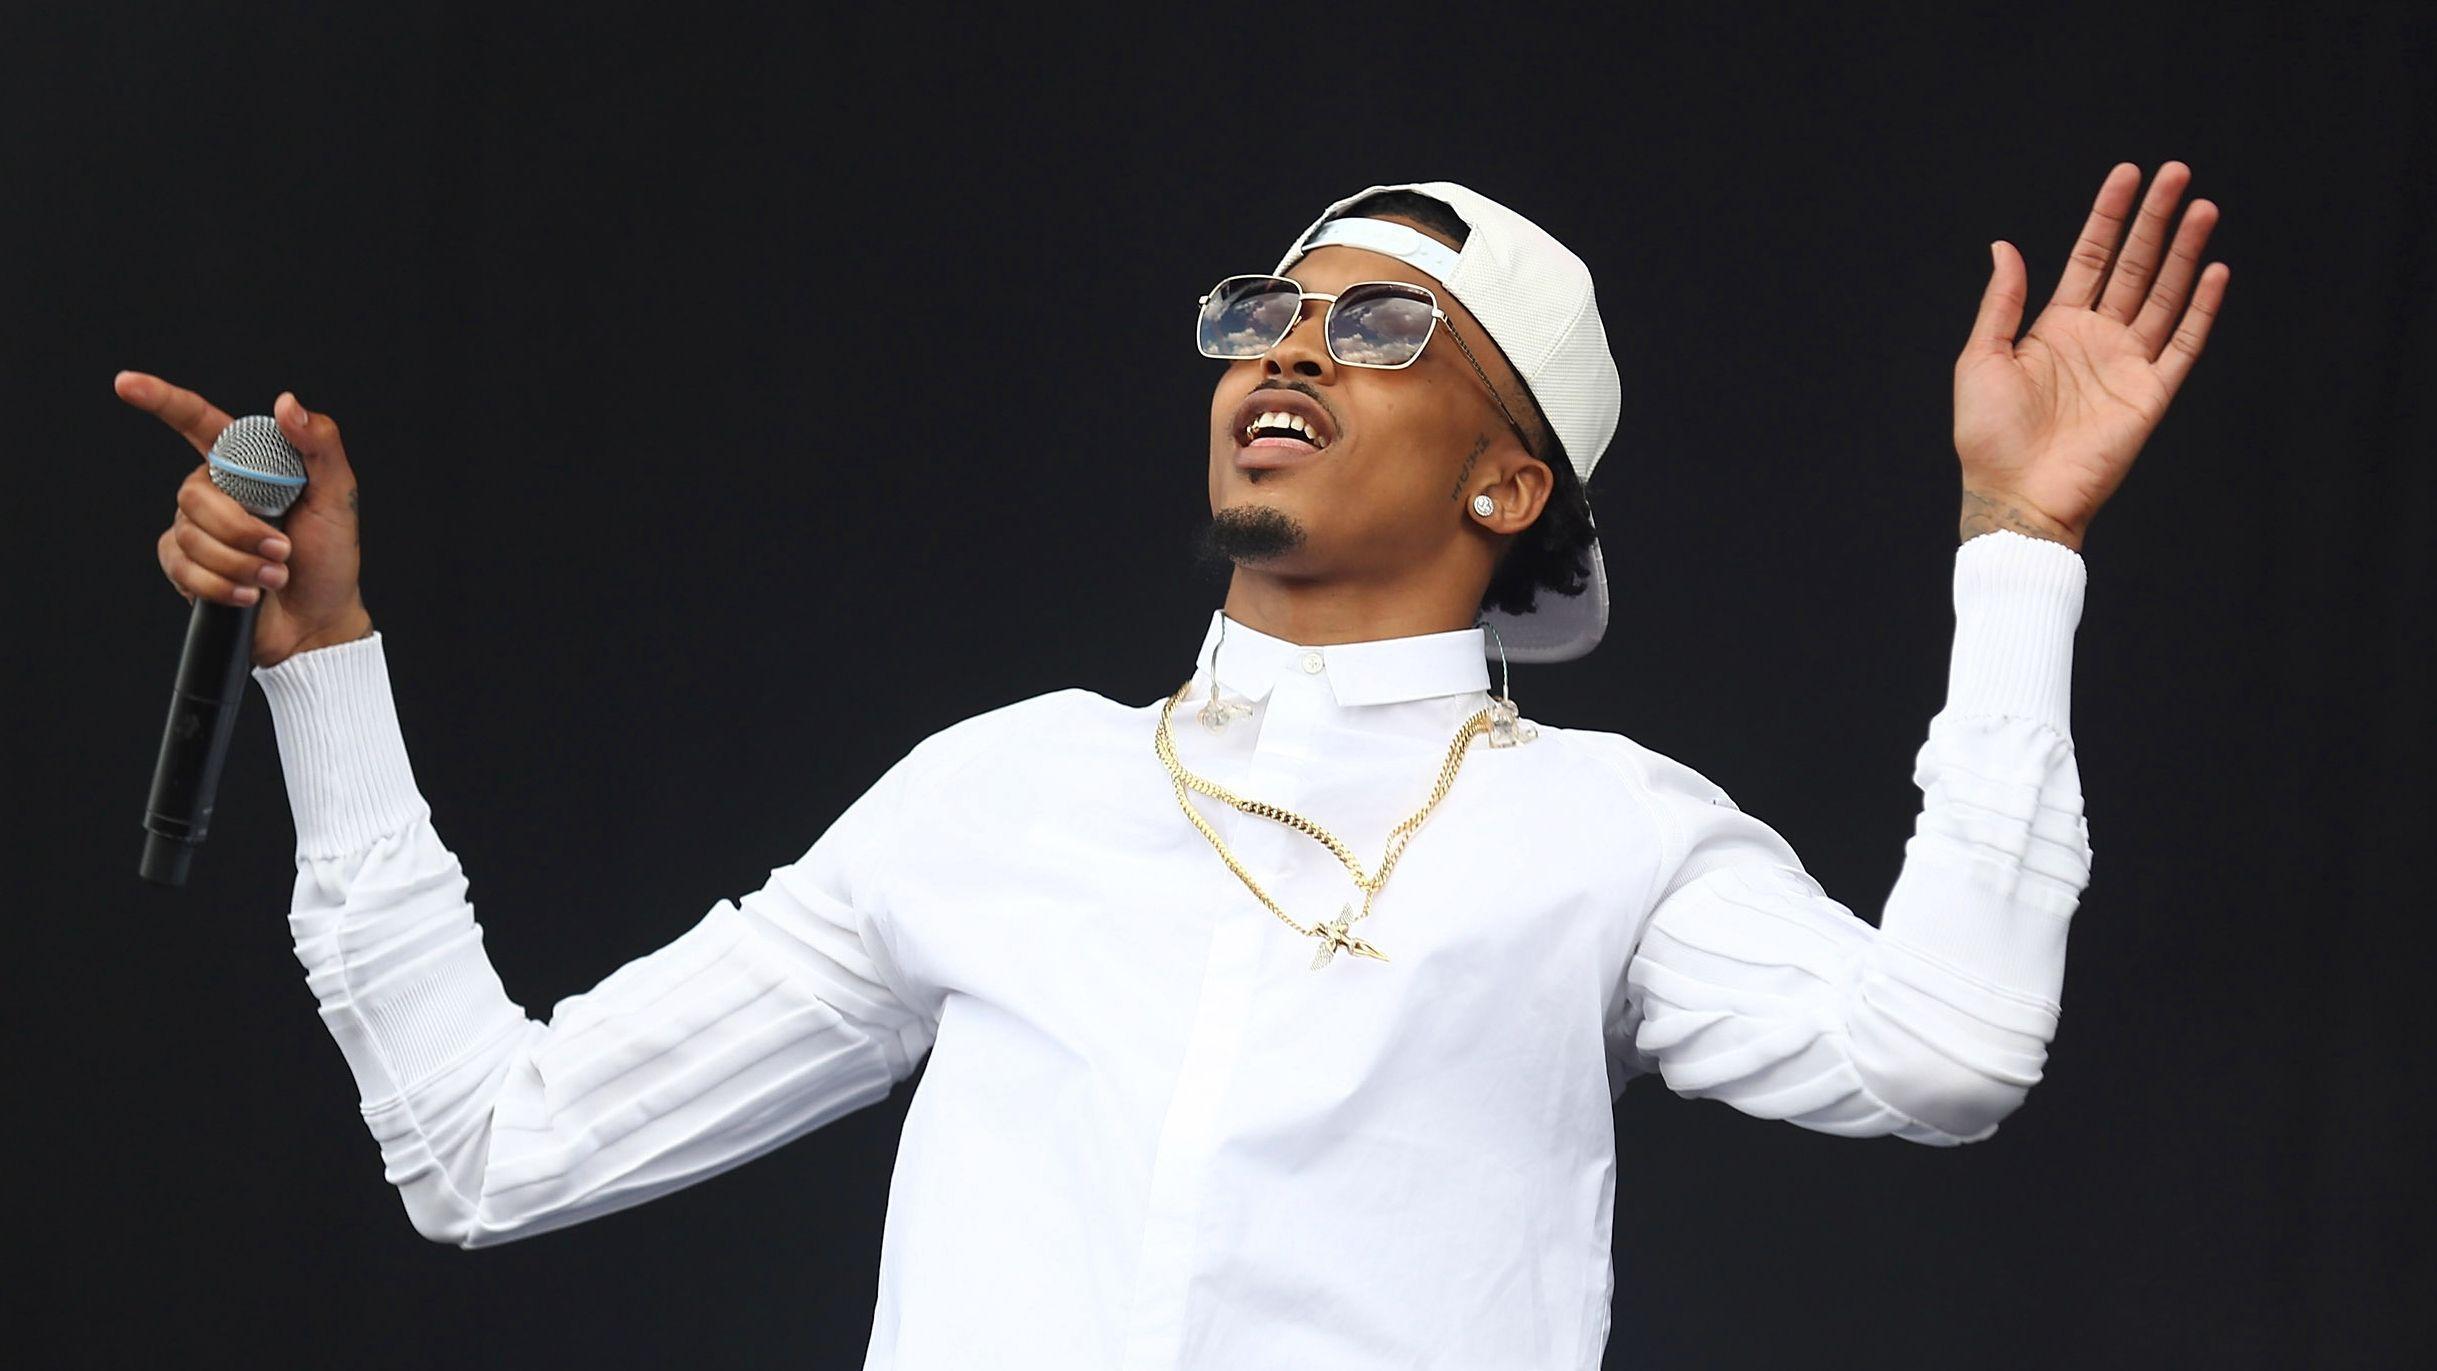 August Alsina Wallpaper Image Photo Picture Background